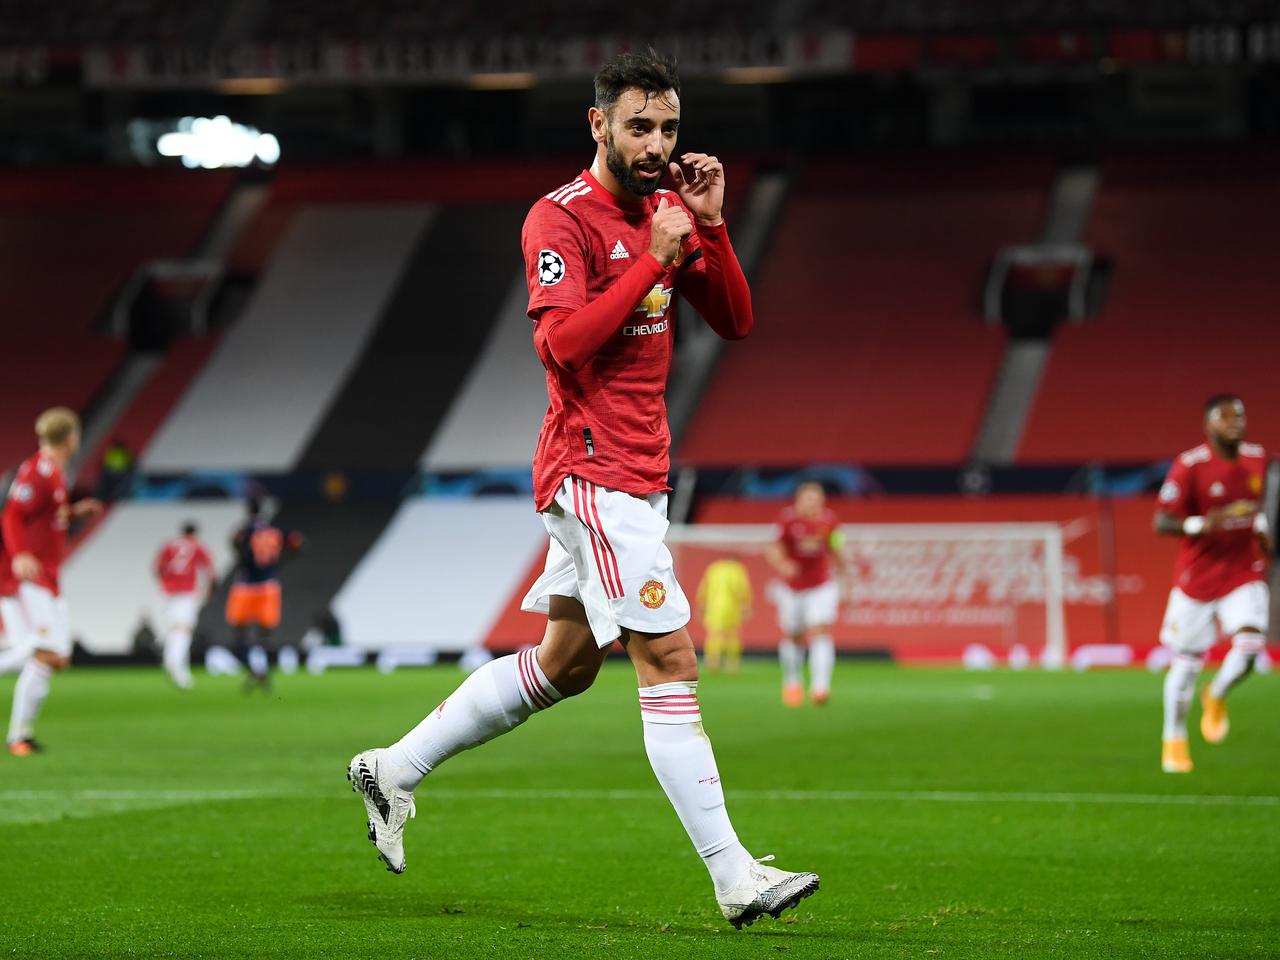 Bruno Fernandes on 20 goals for Man Utd - where does he rank in all-time list? | Manchester United